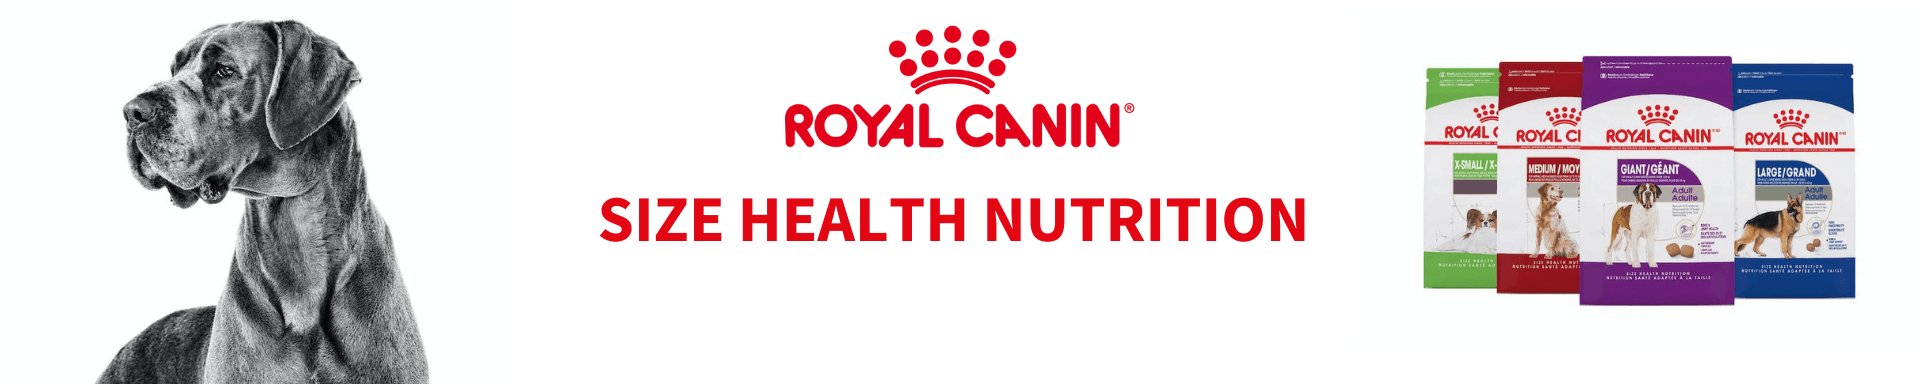 Royal Canin Size Health Nutrition - The Pets Club